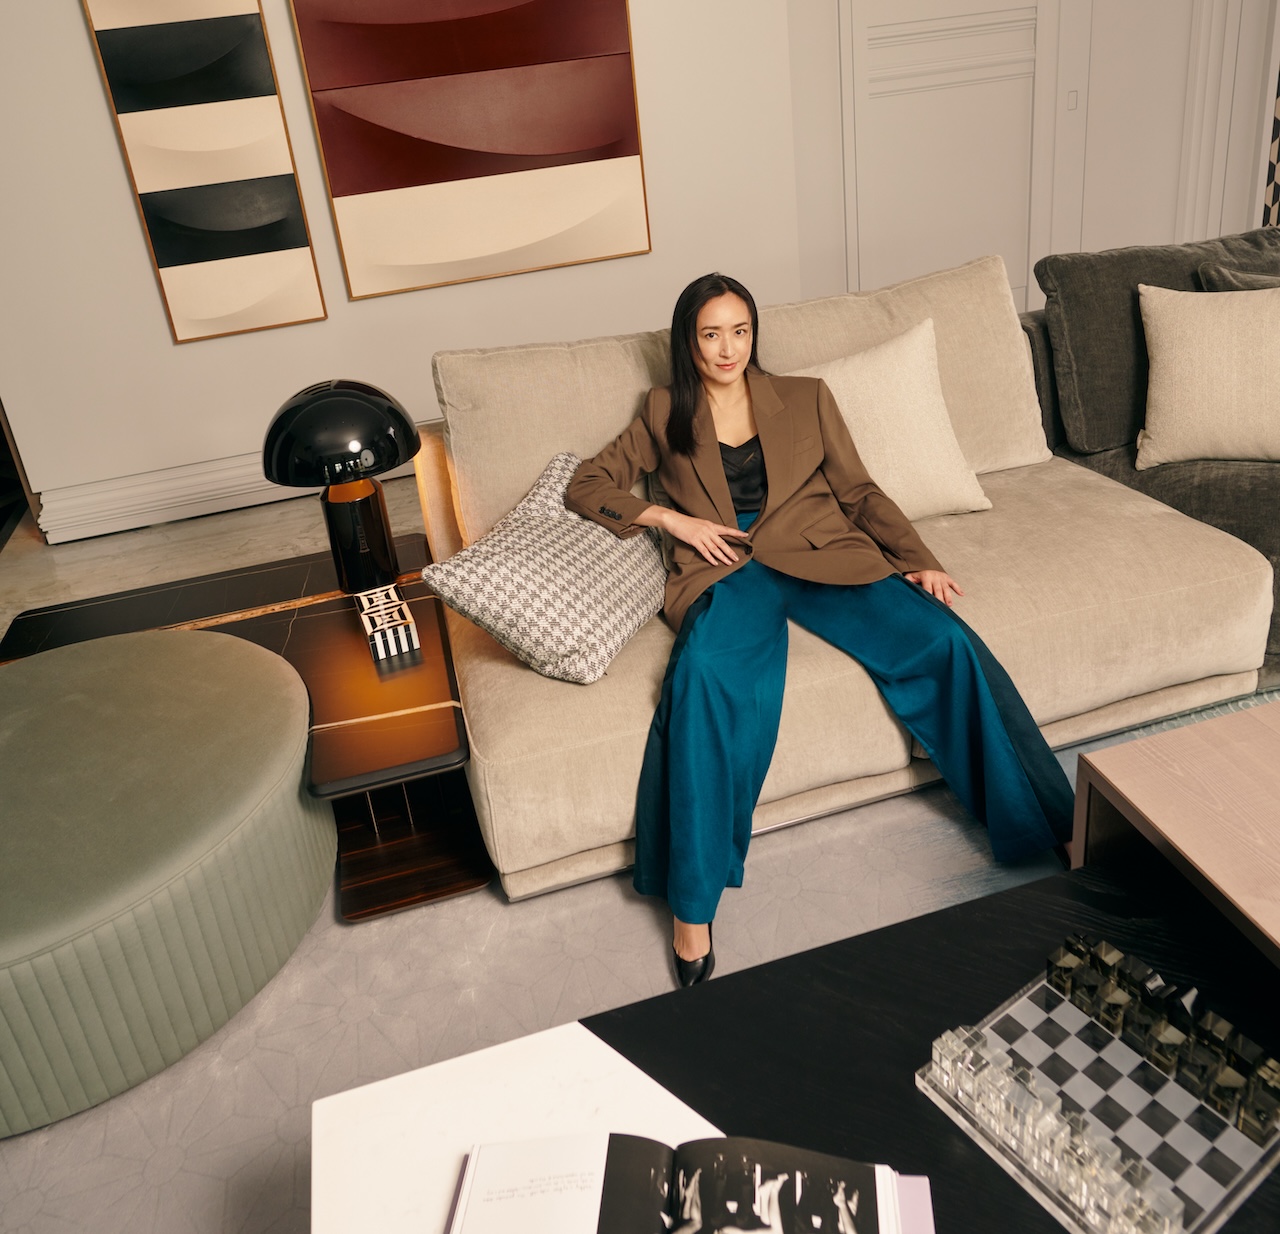 Designer Celia Chu, whose recent projects include Rosewood Bangkok, says there’s a thirst for the avant-garde alongside eco-conscious builds right now.